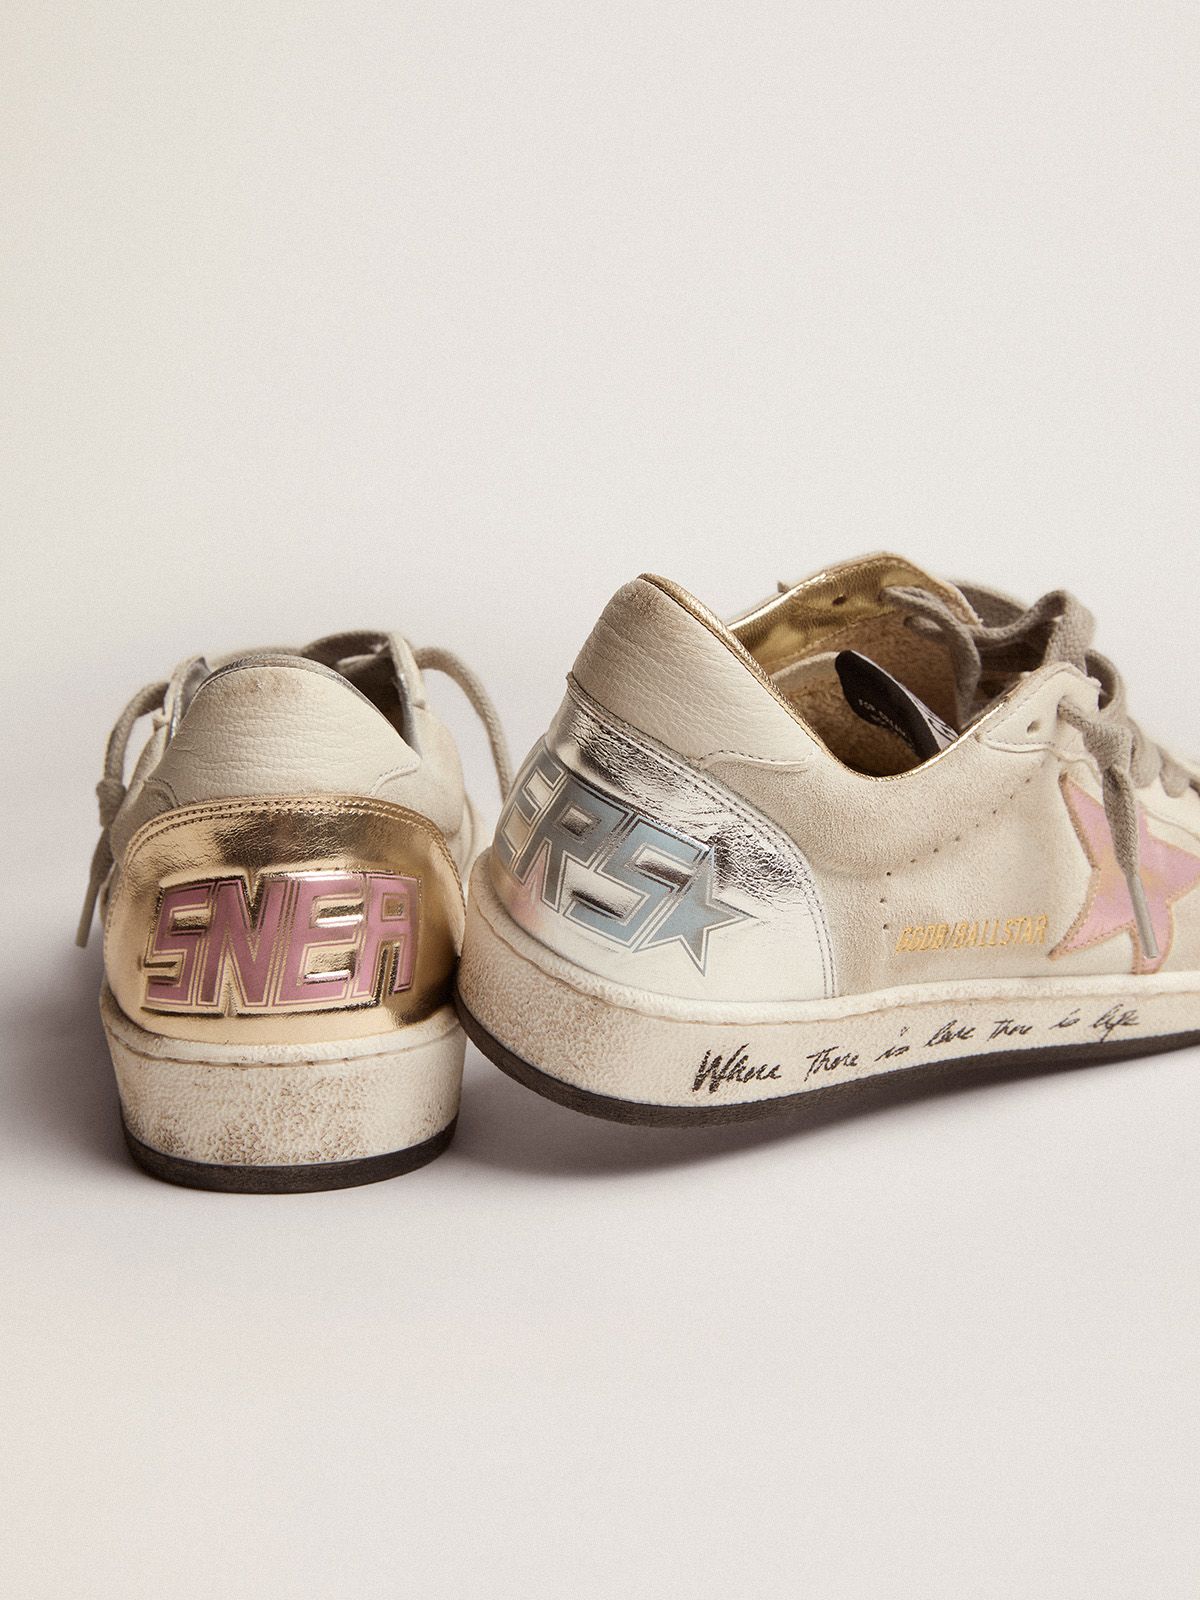 Ball Star sneakers in white suede with multicolored metallic 